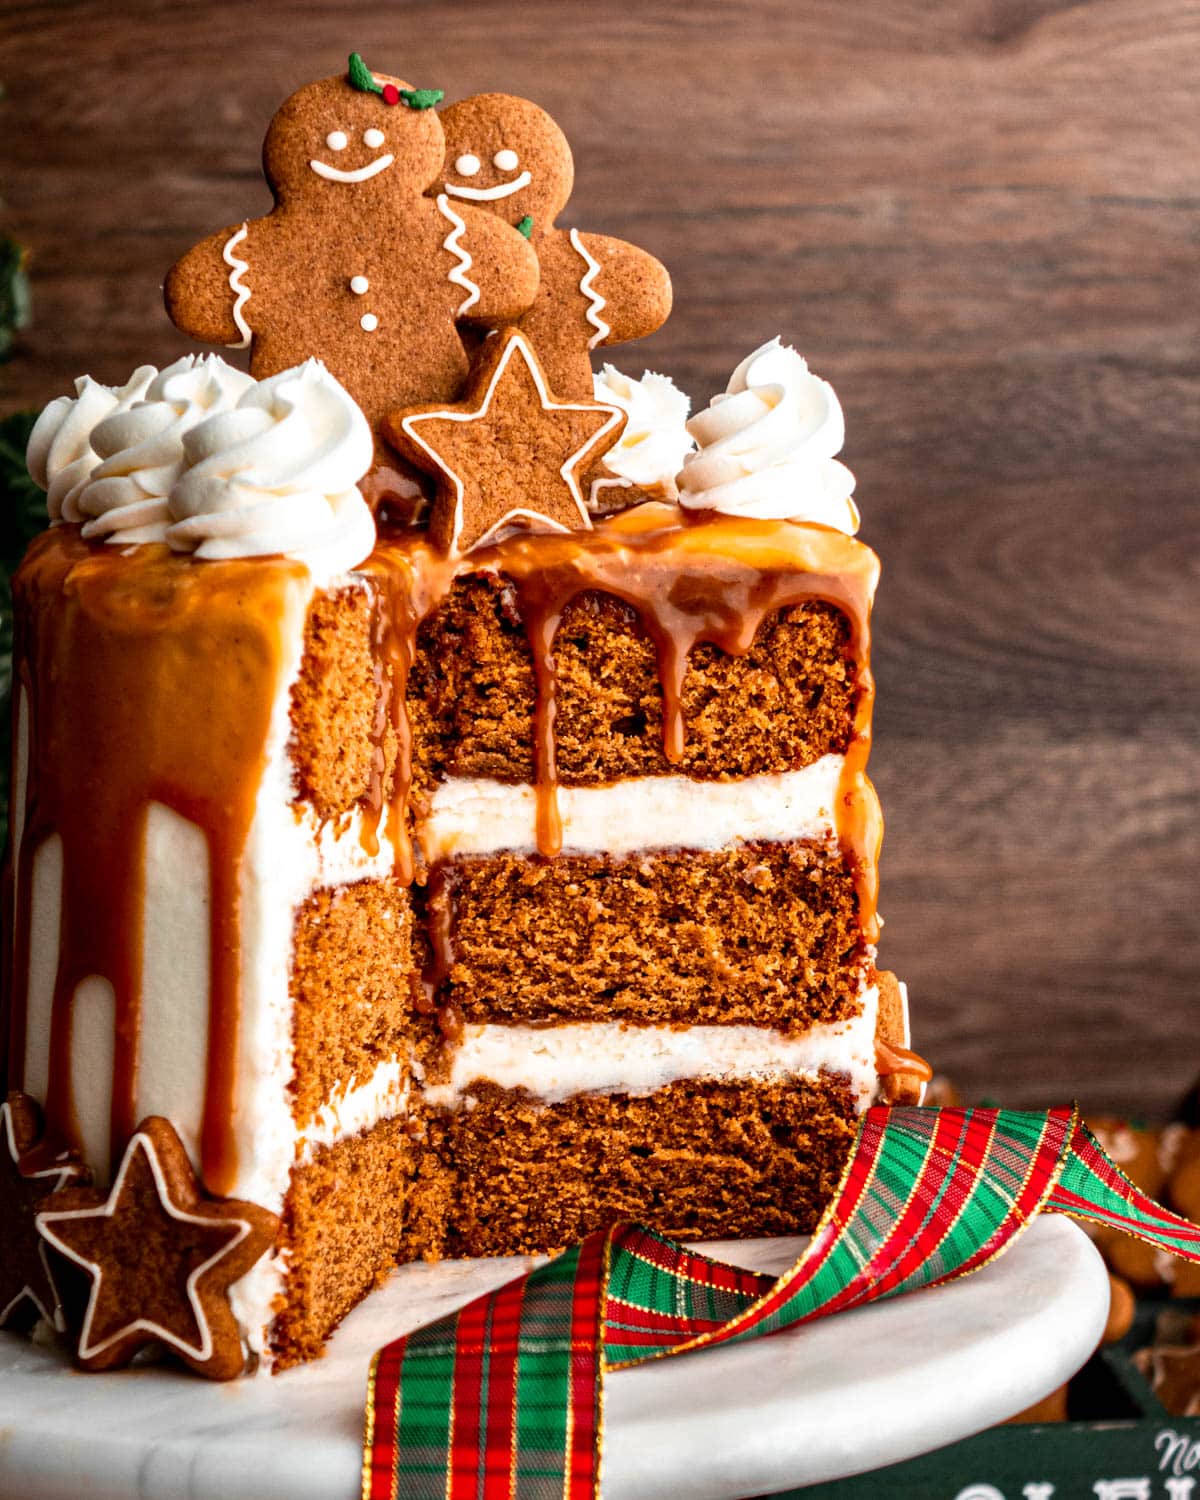 Sliced layered with cream frosting cake with gingerbread decorations on top.